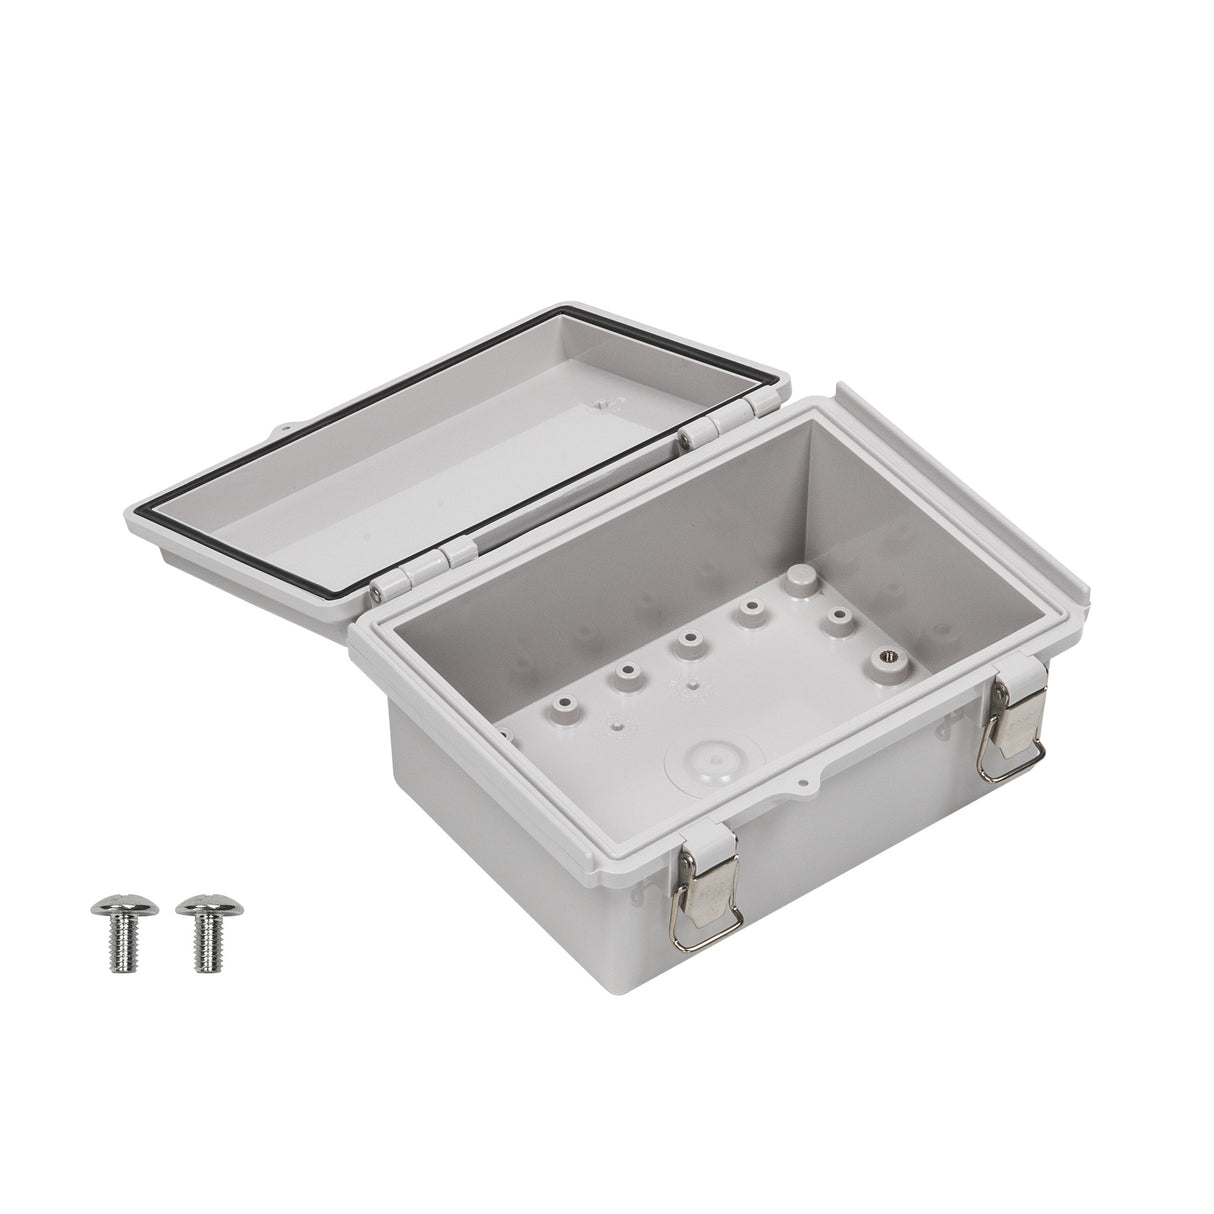 Boxco P-Series 135x185x85mm Plastic Enclosure, IP67, IK08, PC, Grey Cover, Molded Hinge and Latch Type